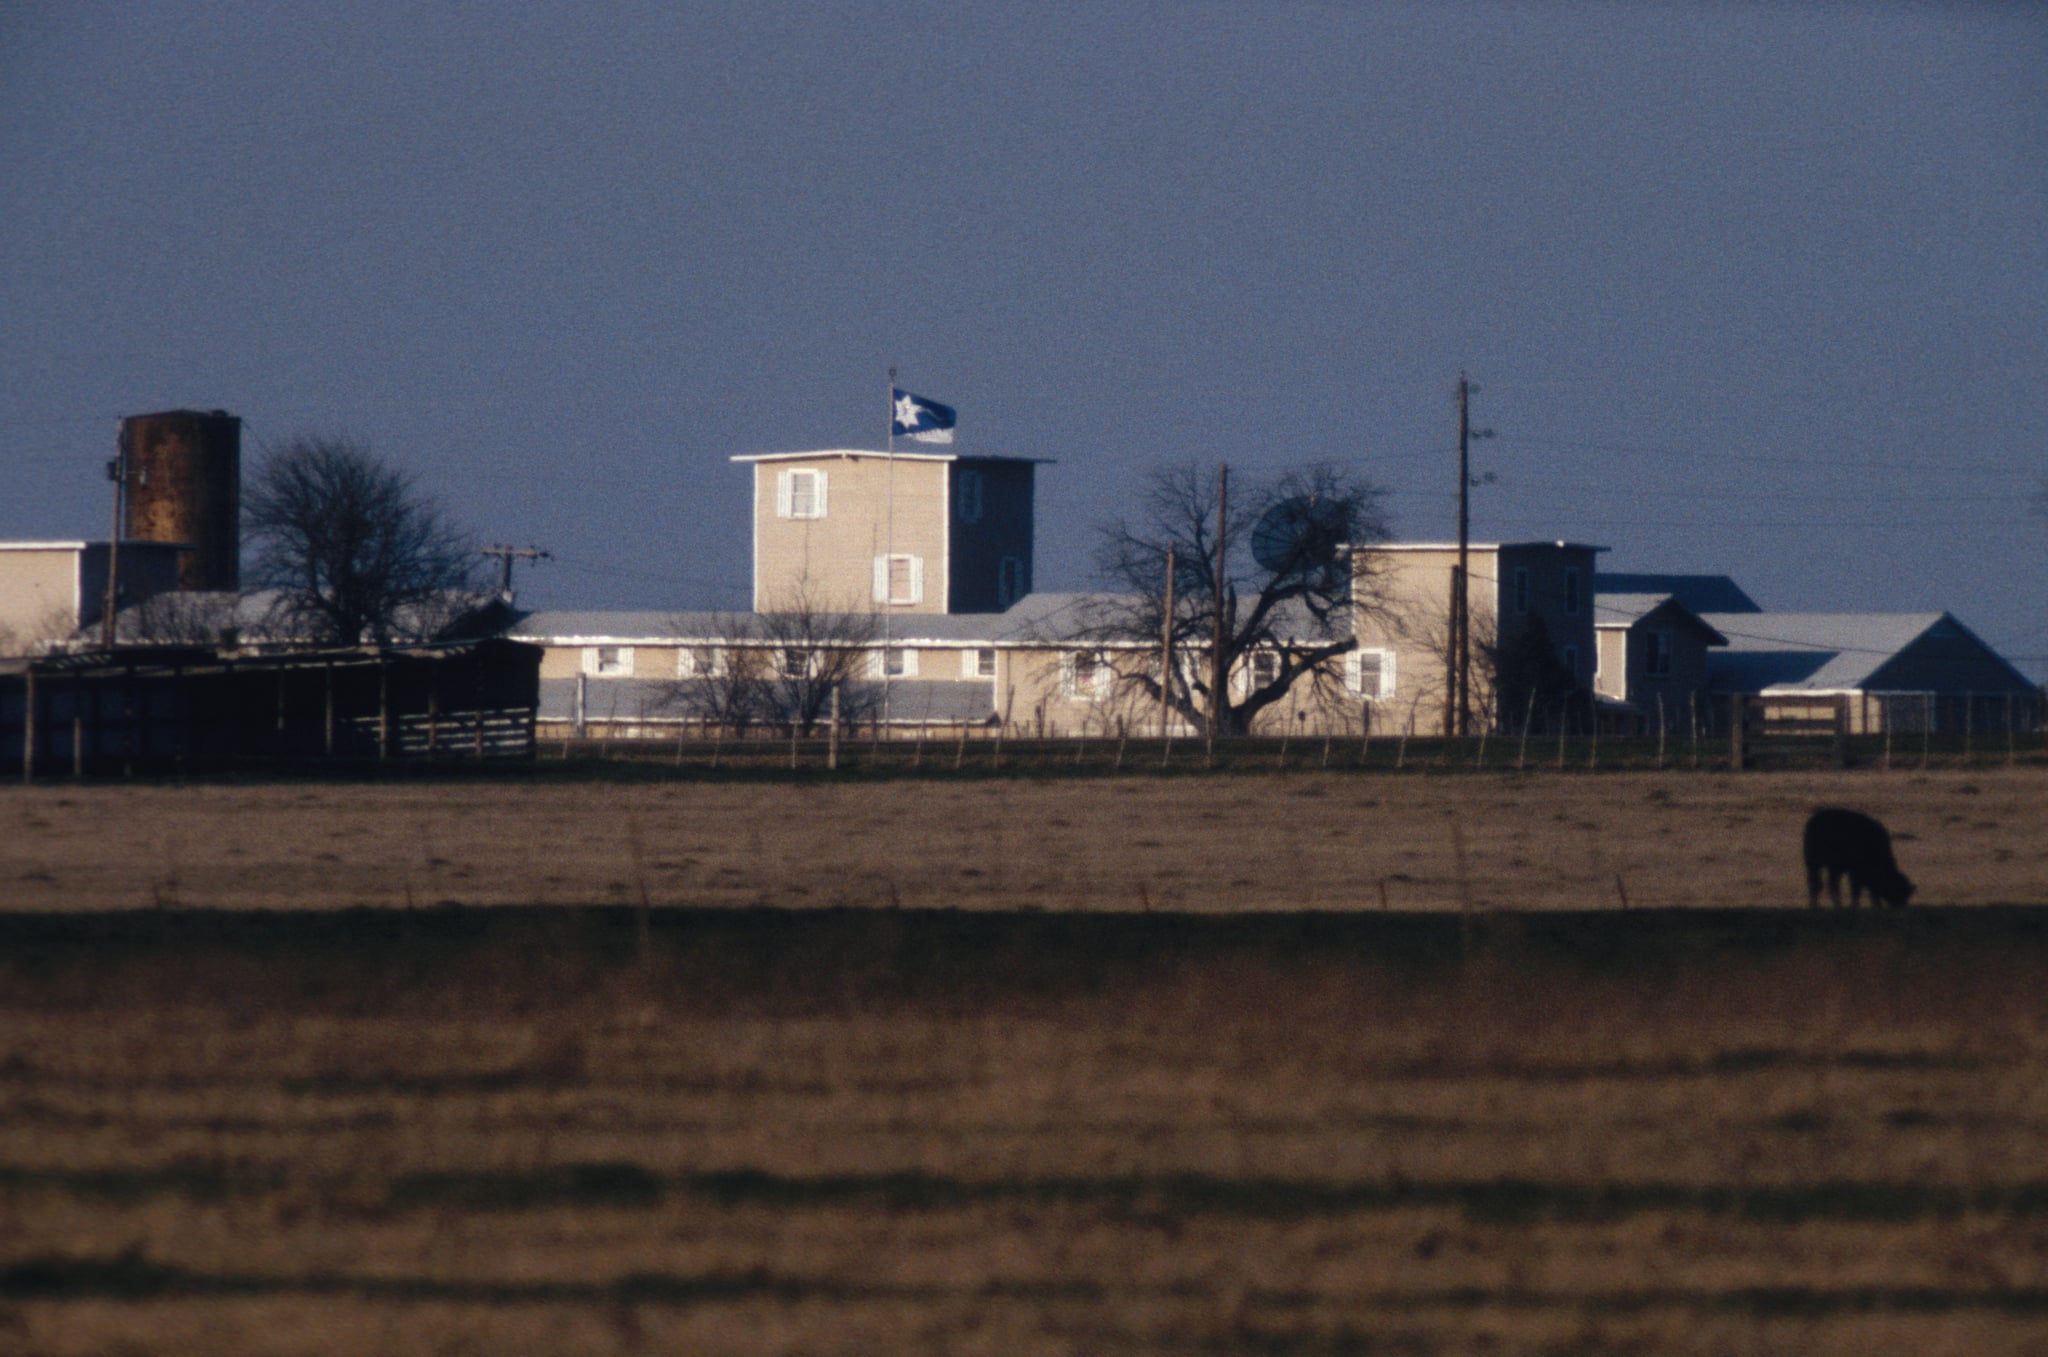 The Branch Davidian Compound that the Bureau of Alcohol, Tobacco, and Firearms and the FBI attempted to raid on February 28, 1993. (Photo by Robert Daemmrich Photography Inc/Sygma via Getty Images)